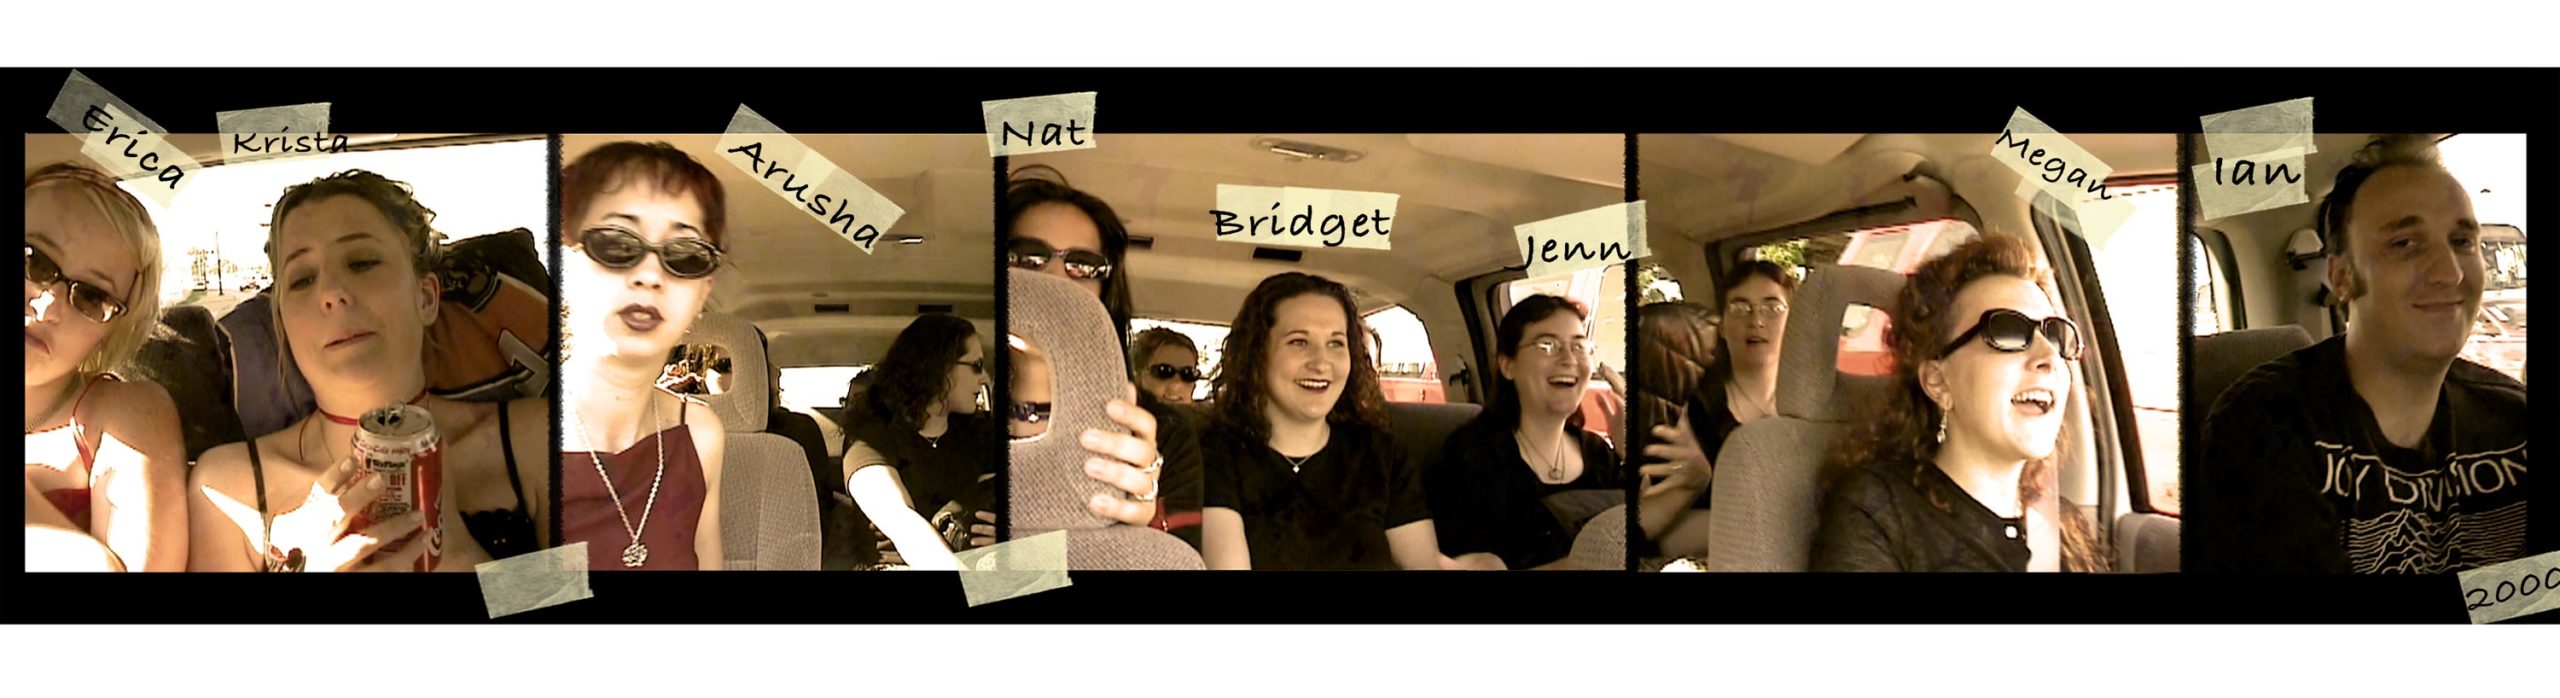 Snapshots of friends smiling and riding together in a minivan